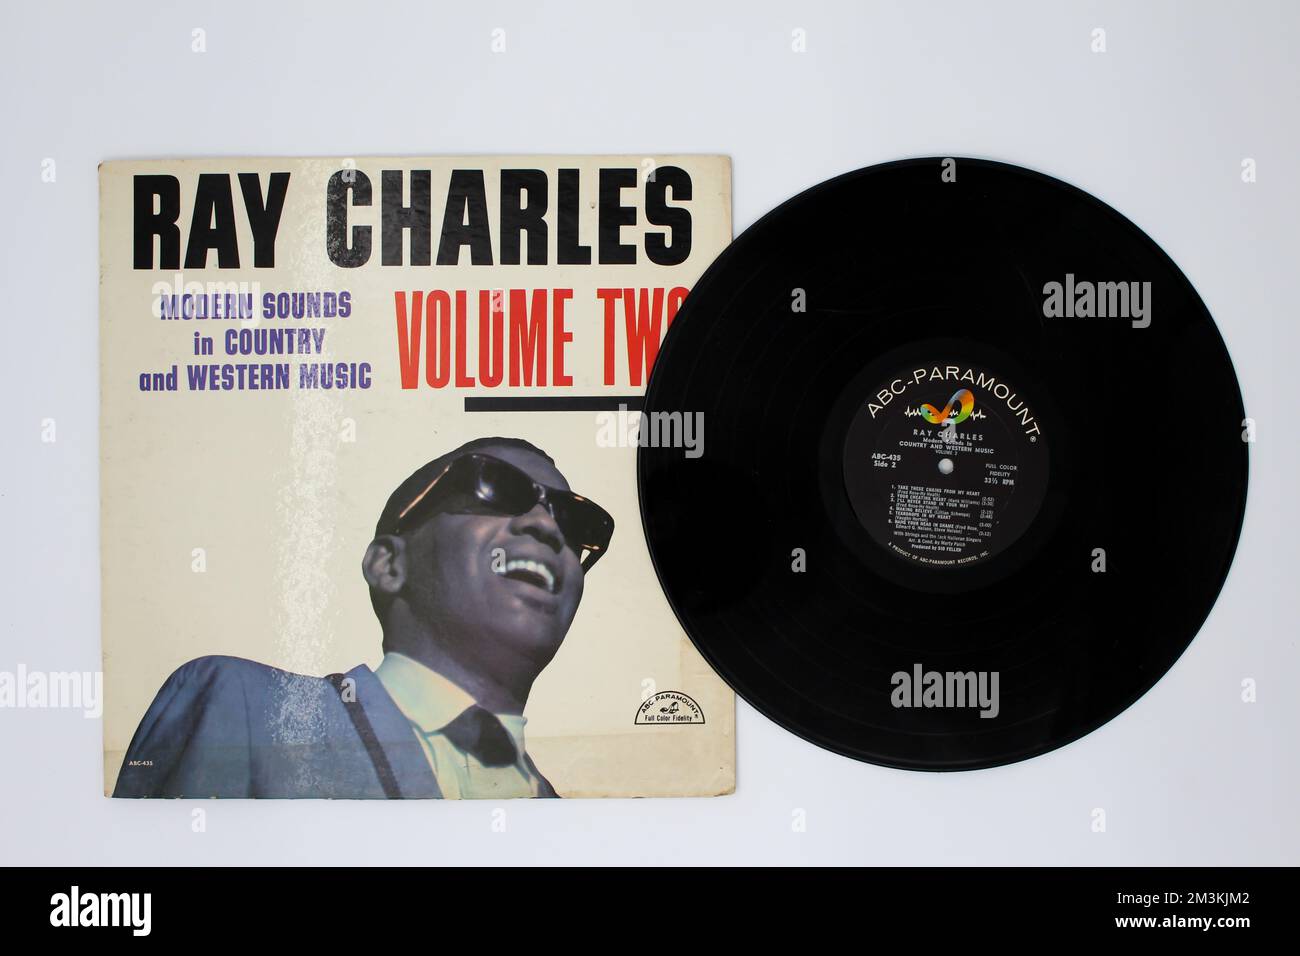 Funk and soul blues and jazz artist, album di musica Ray Charles sul disco in vinile LP. Copertina dal titolo Modern Sounds in Country and Western Music Volume Two Foto Stock